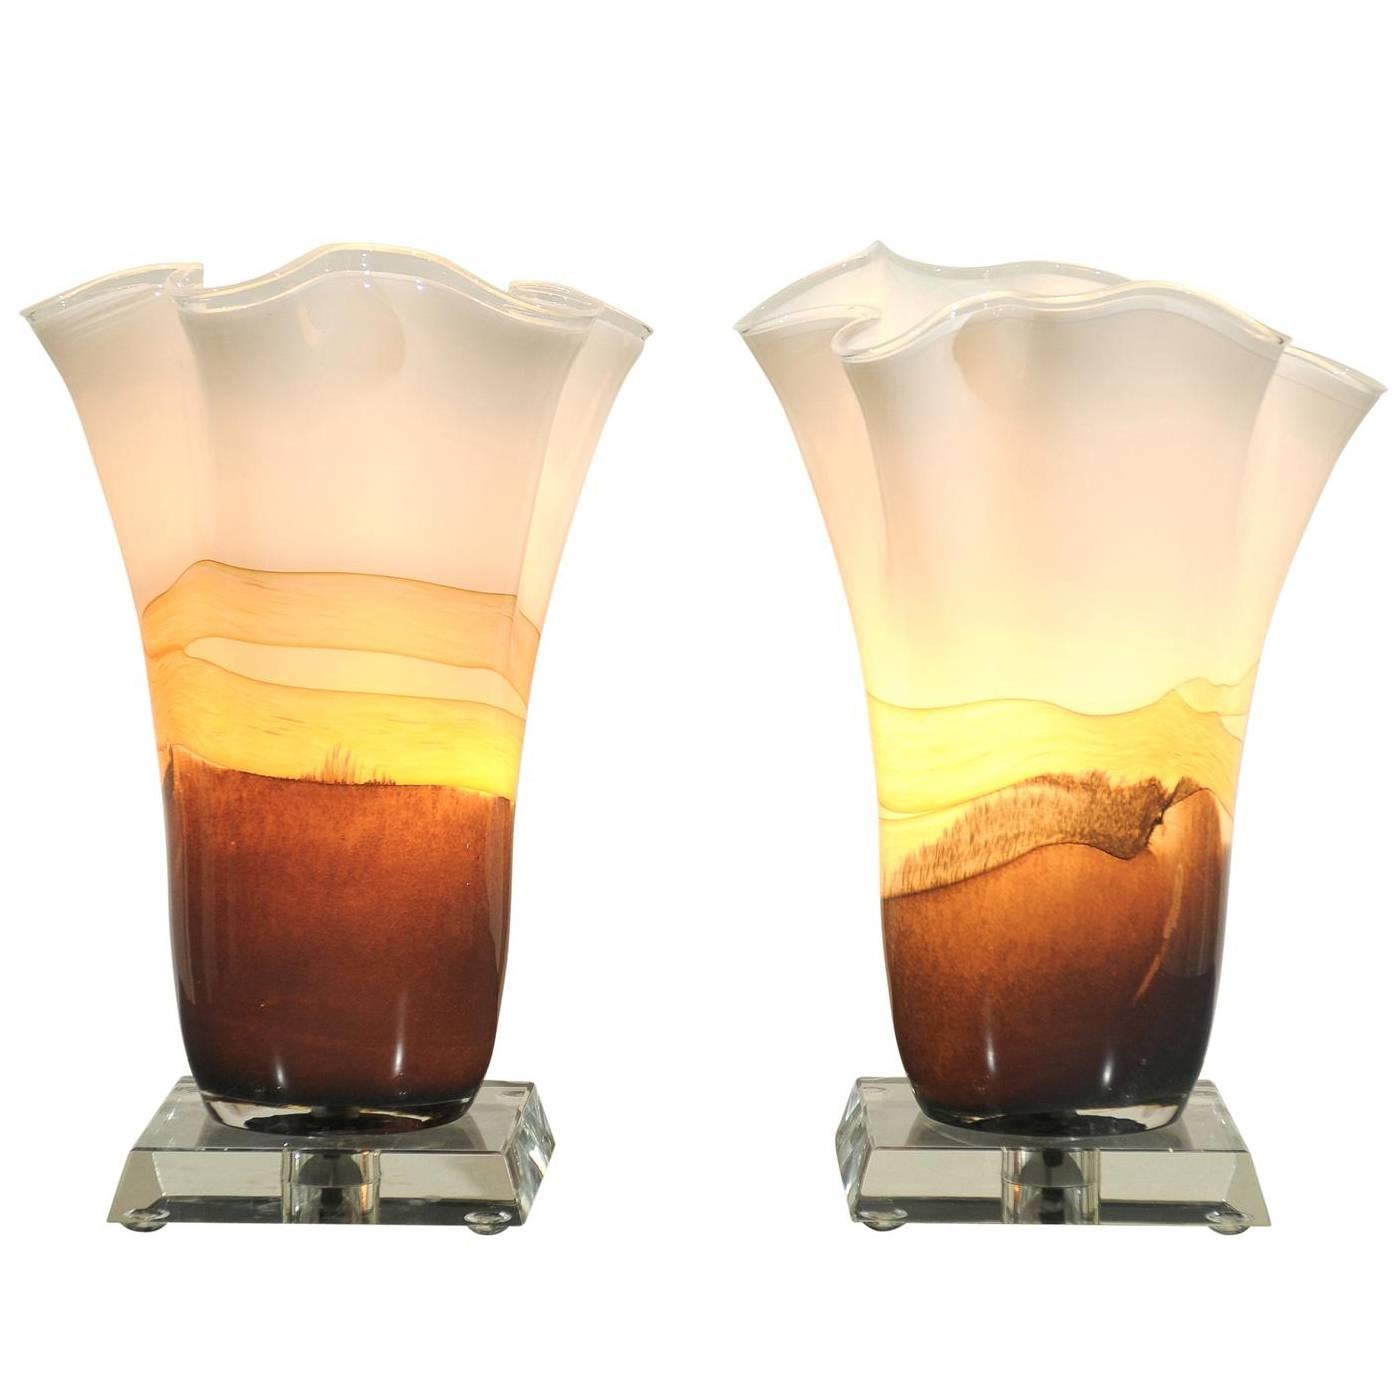 Incredible Pair of Blown Glass Table Torchieres in Cream and Caramel